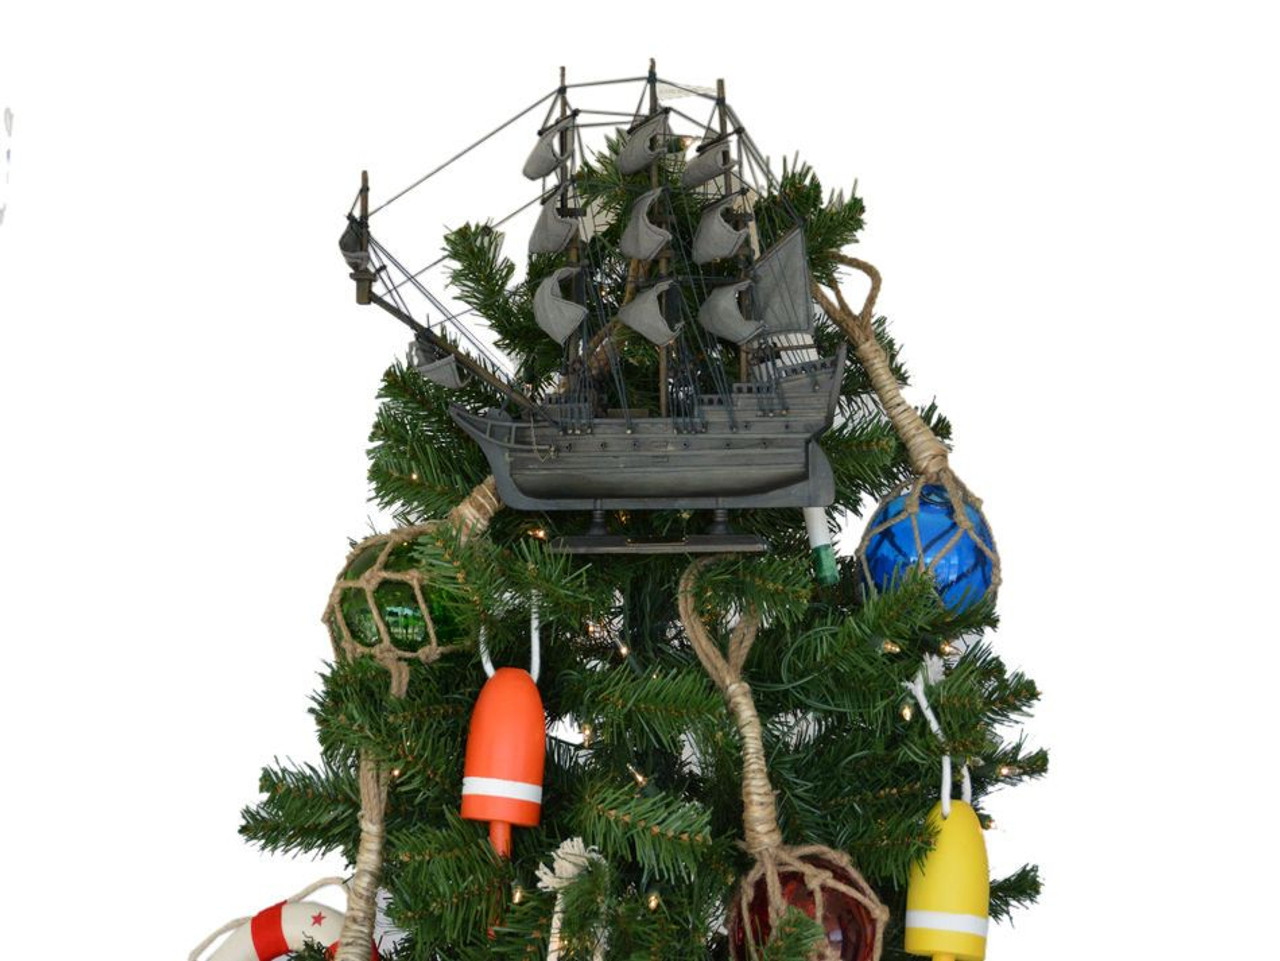 Wooden Flying Dutchman Model Pirate Ship Christmas Tree Topper ...